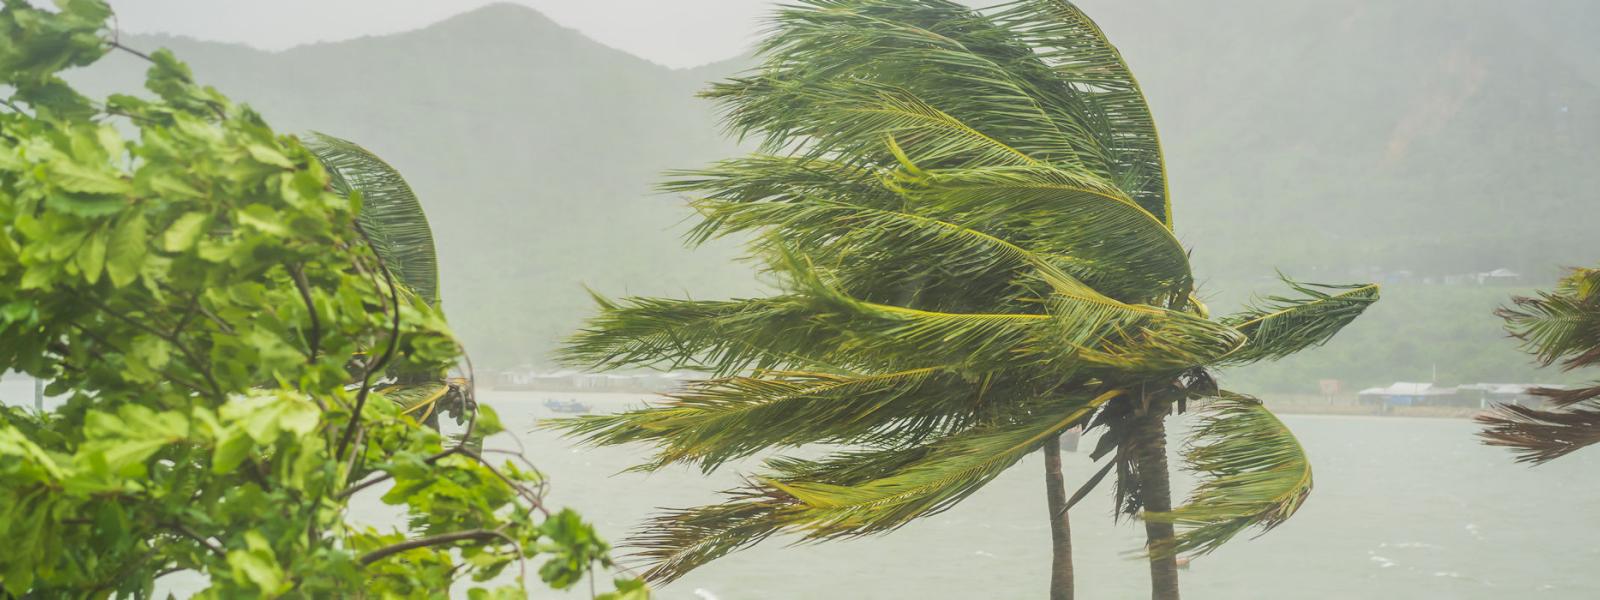 Caribbean strong winds